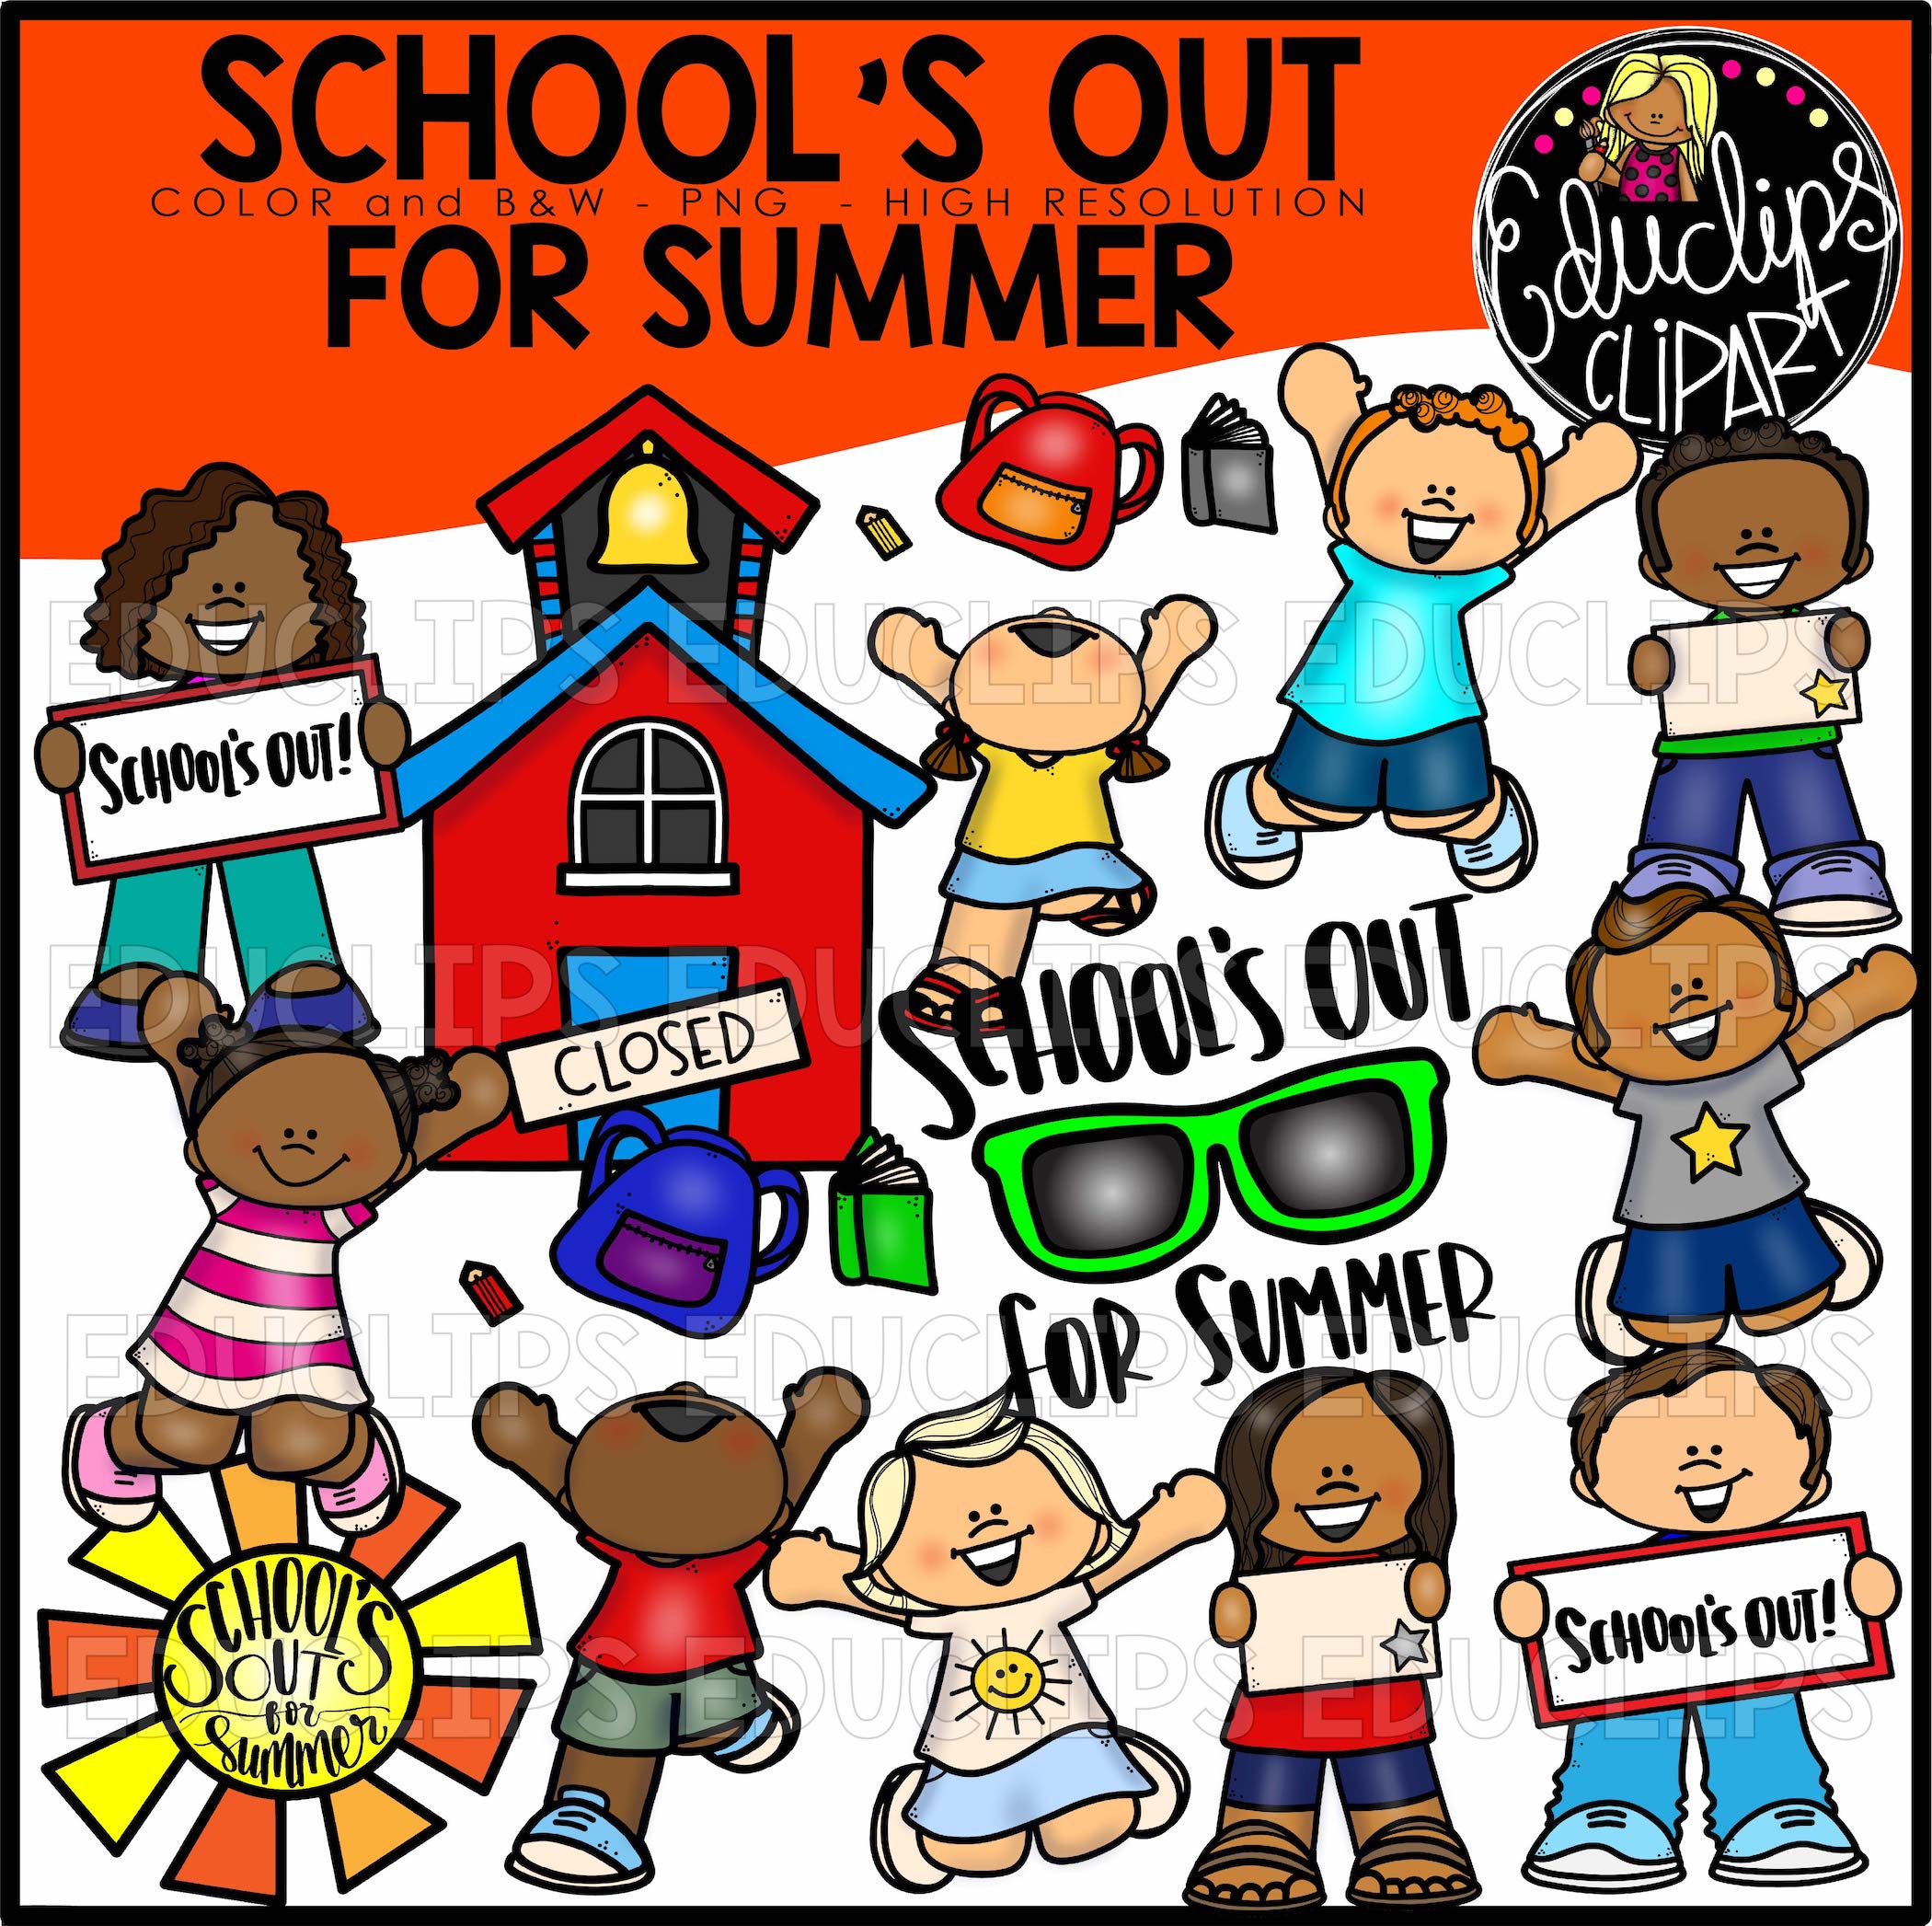 School's Out For Summer Clip Art Bundle (Color and B&W) - Welcome to ...